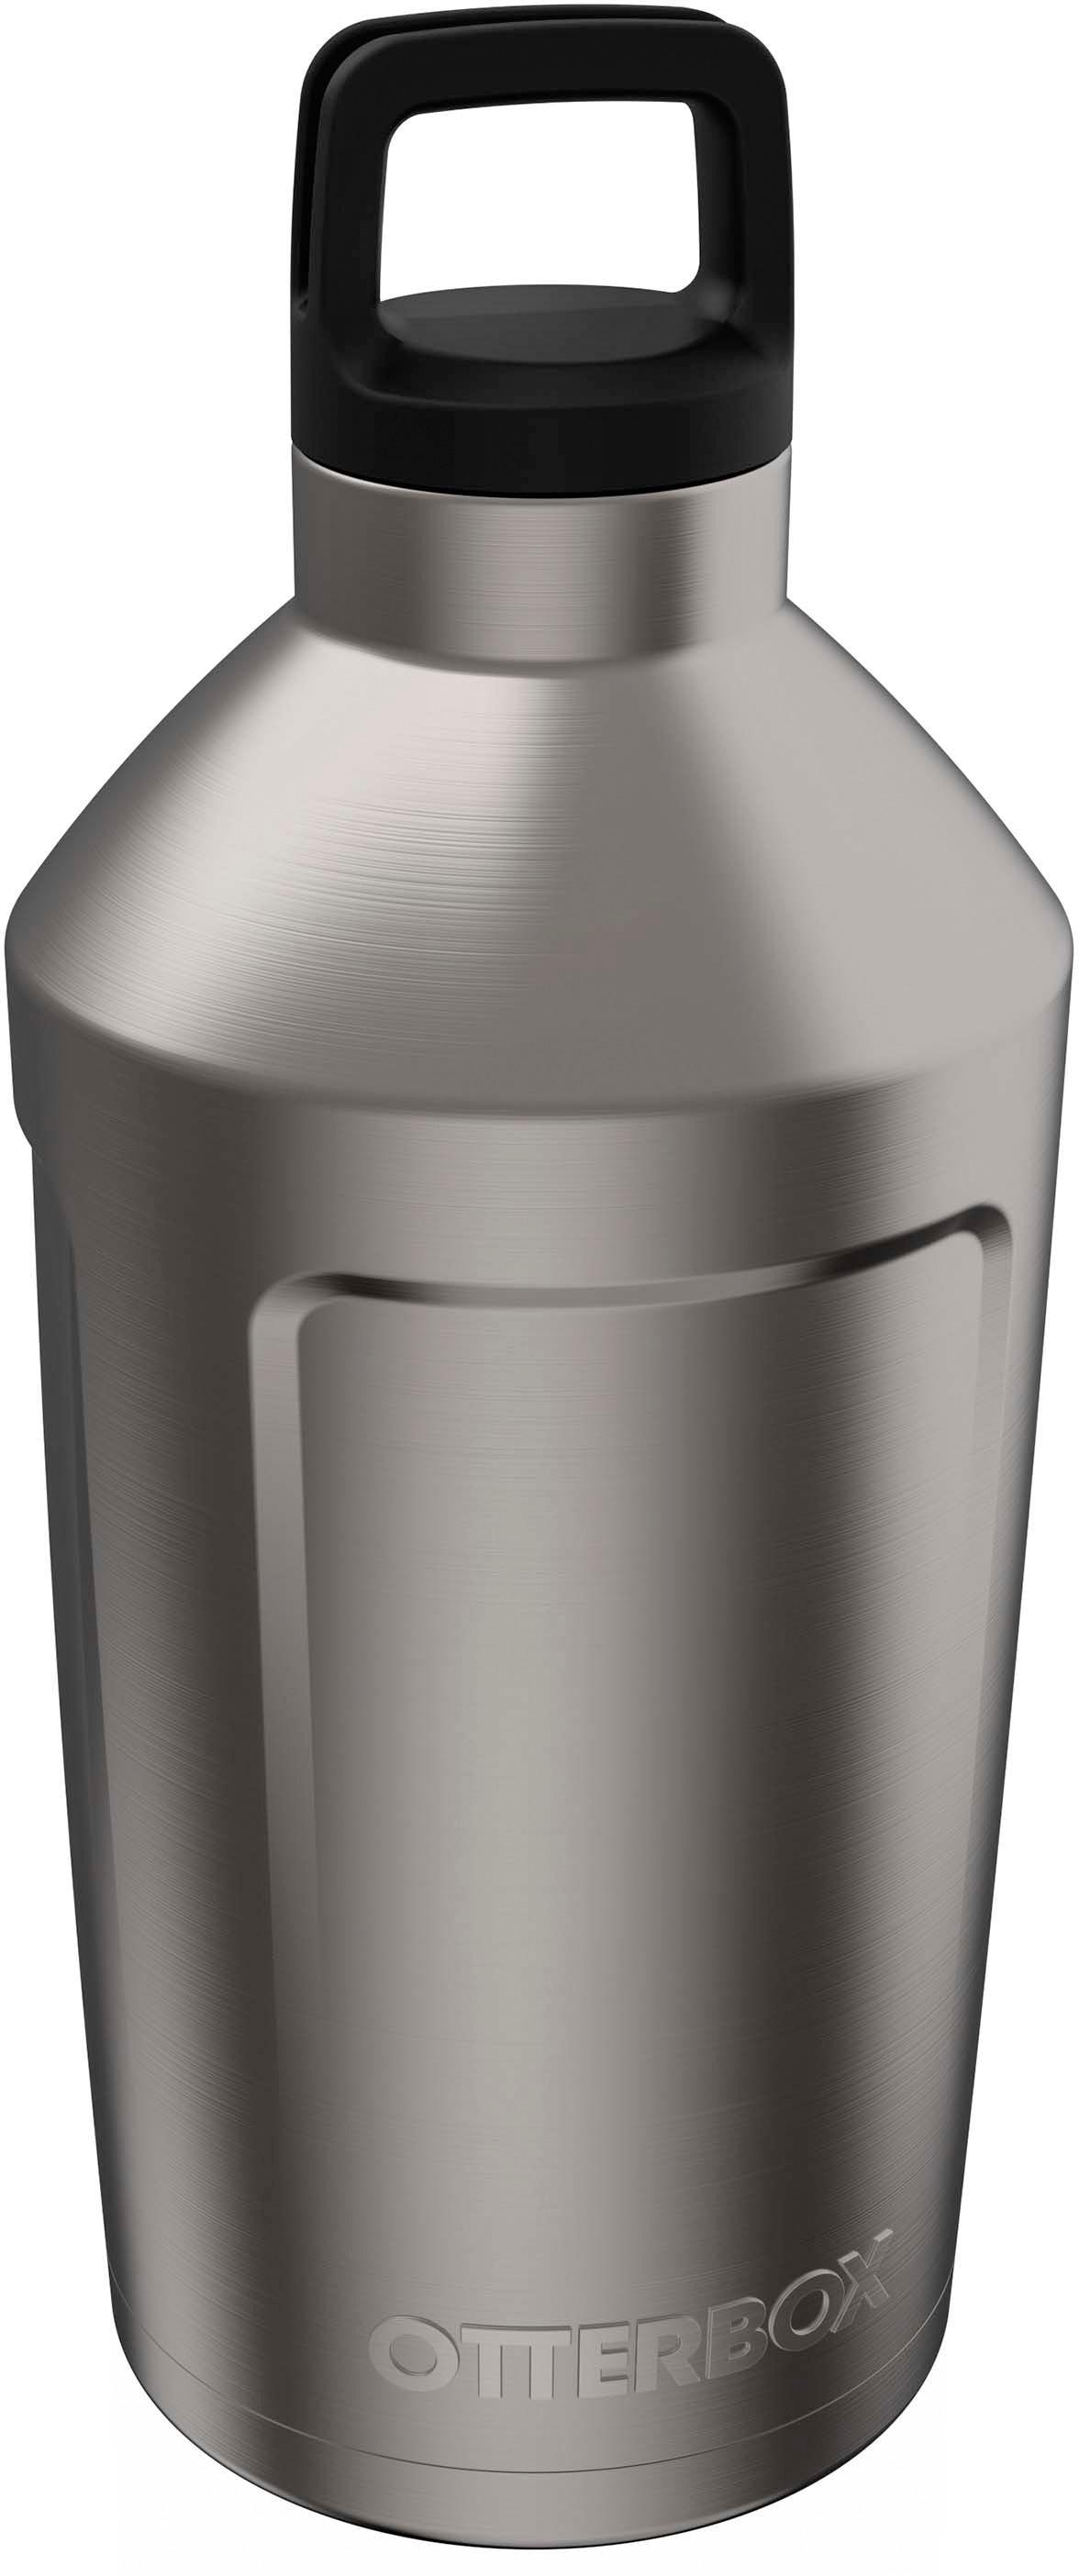 OtterBox - Elevation 64 Tumbler - Stainless Steel